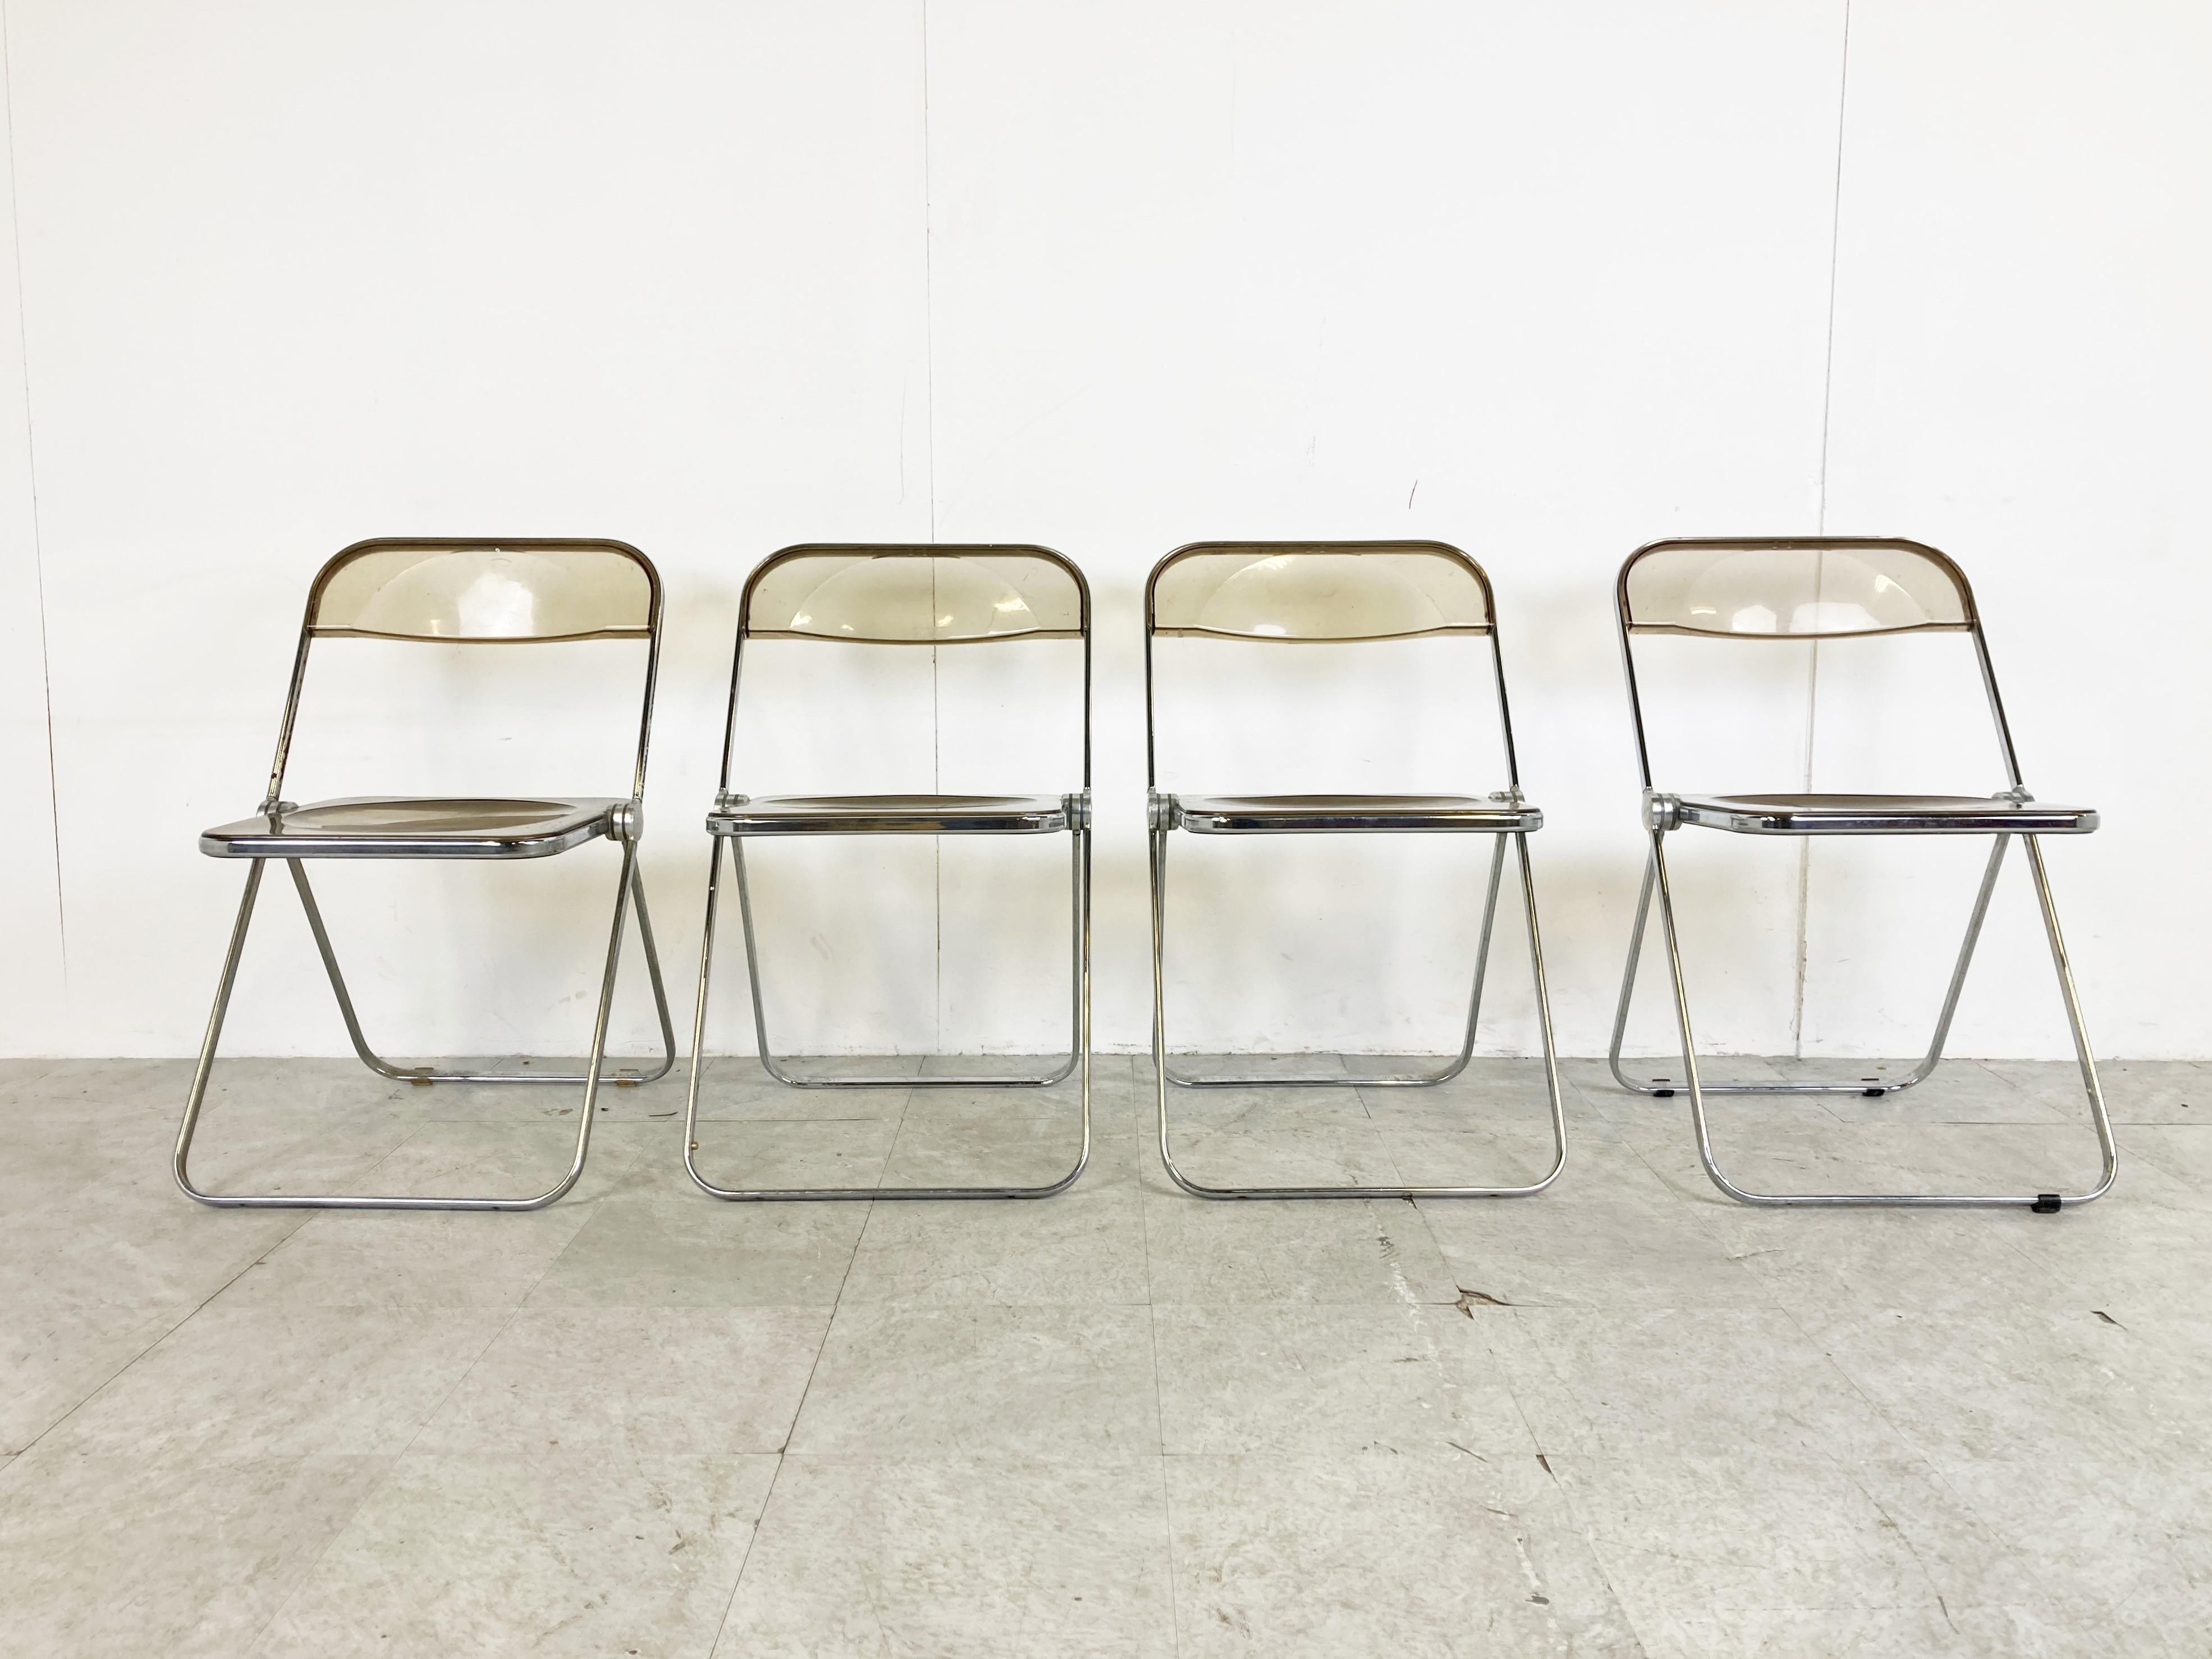 Well known folding chairs model 'plia' designed by Giancarlo Piretti for Anonima Castelli.

These chairs where presented at the 1967 Fiere del Mobile in Milan and are famous ever since thanks to their timeless and foldable design.

The chairs